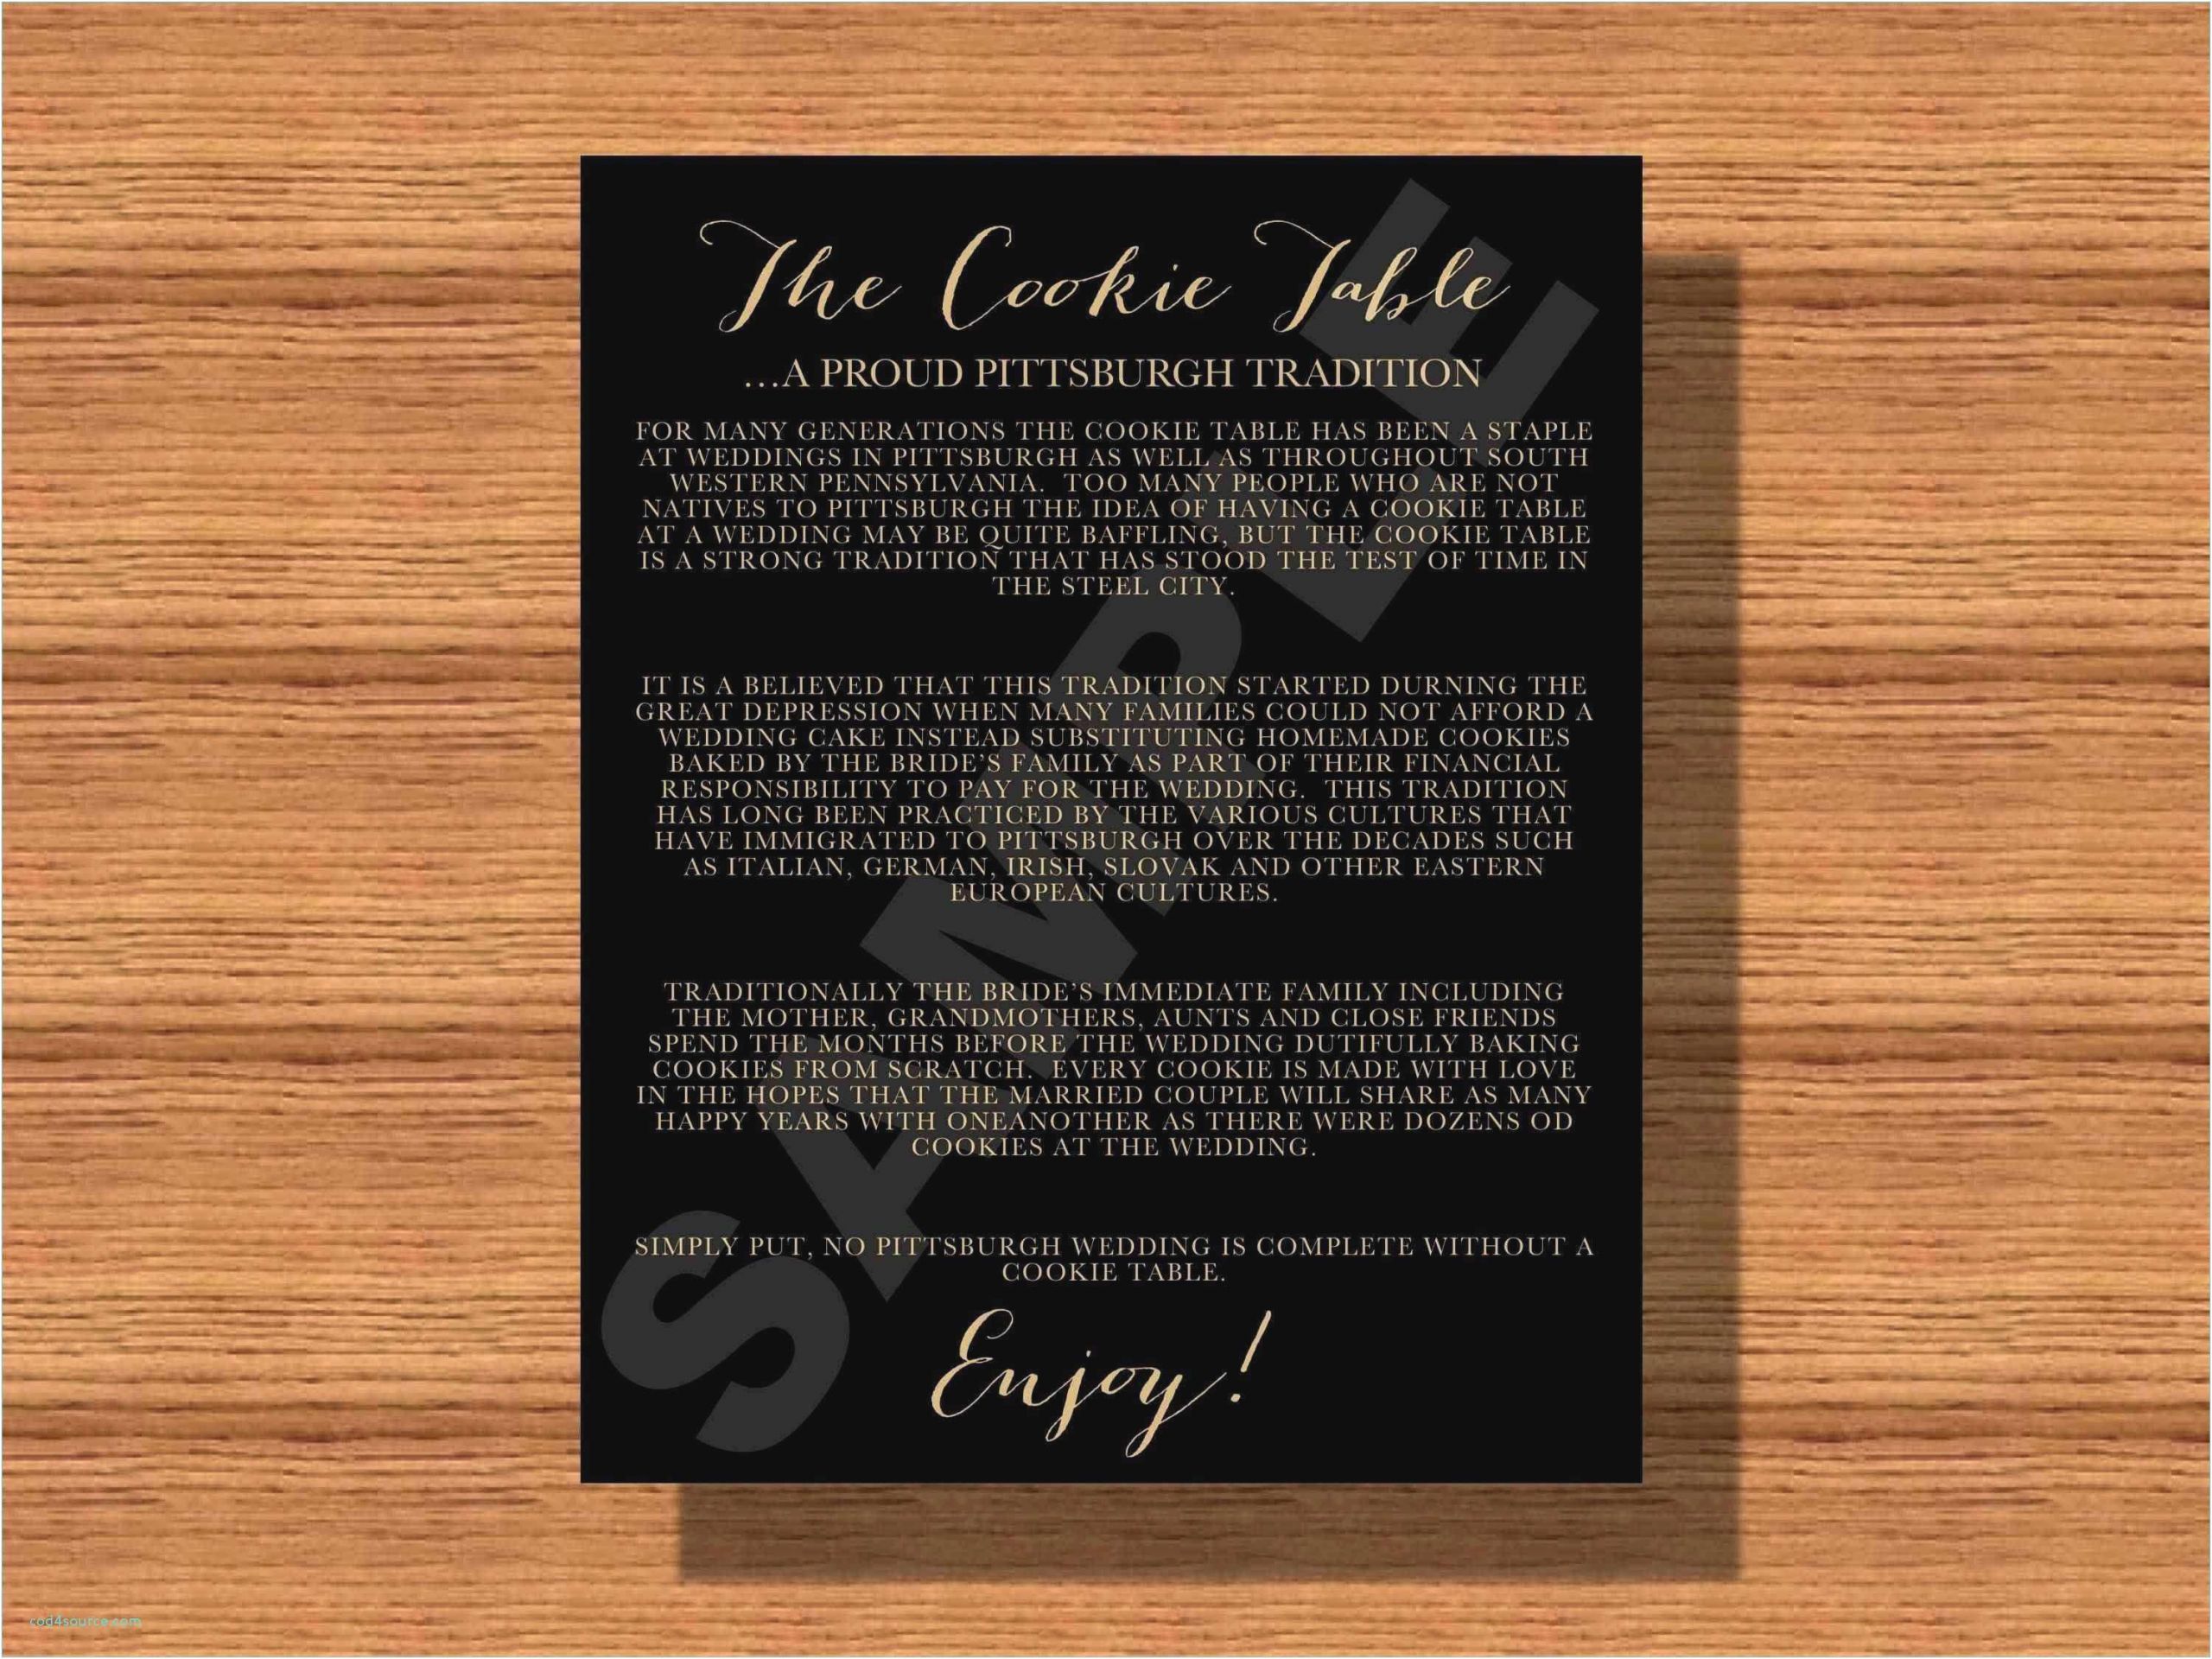 free 57 get well card template 2019 of business thank you cards templates of business thank you cards templates jpg